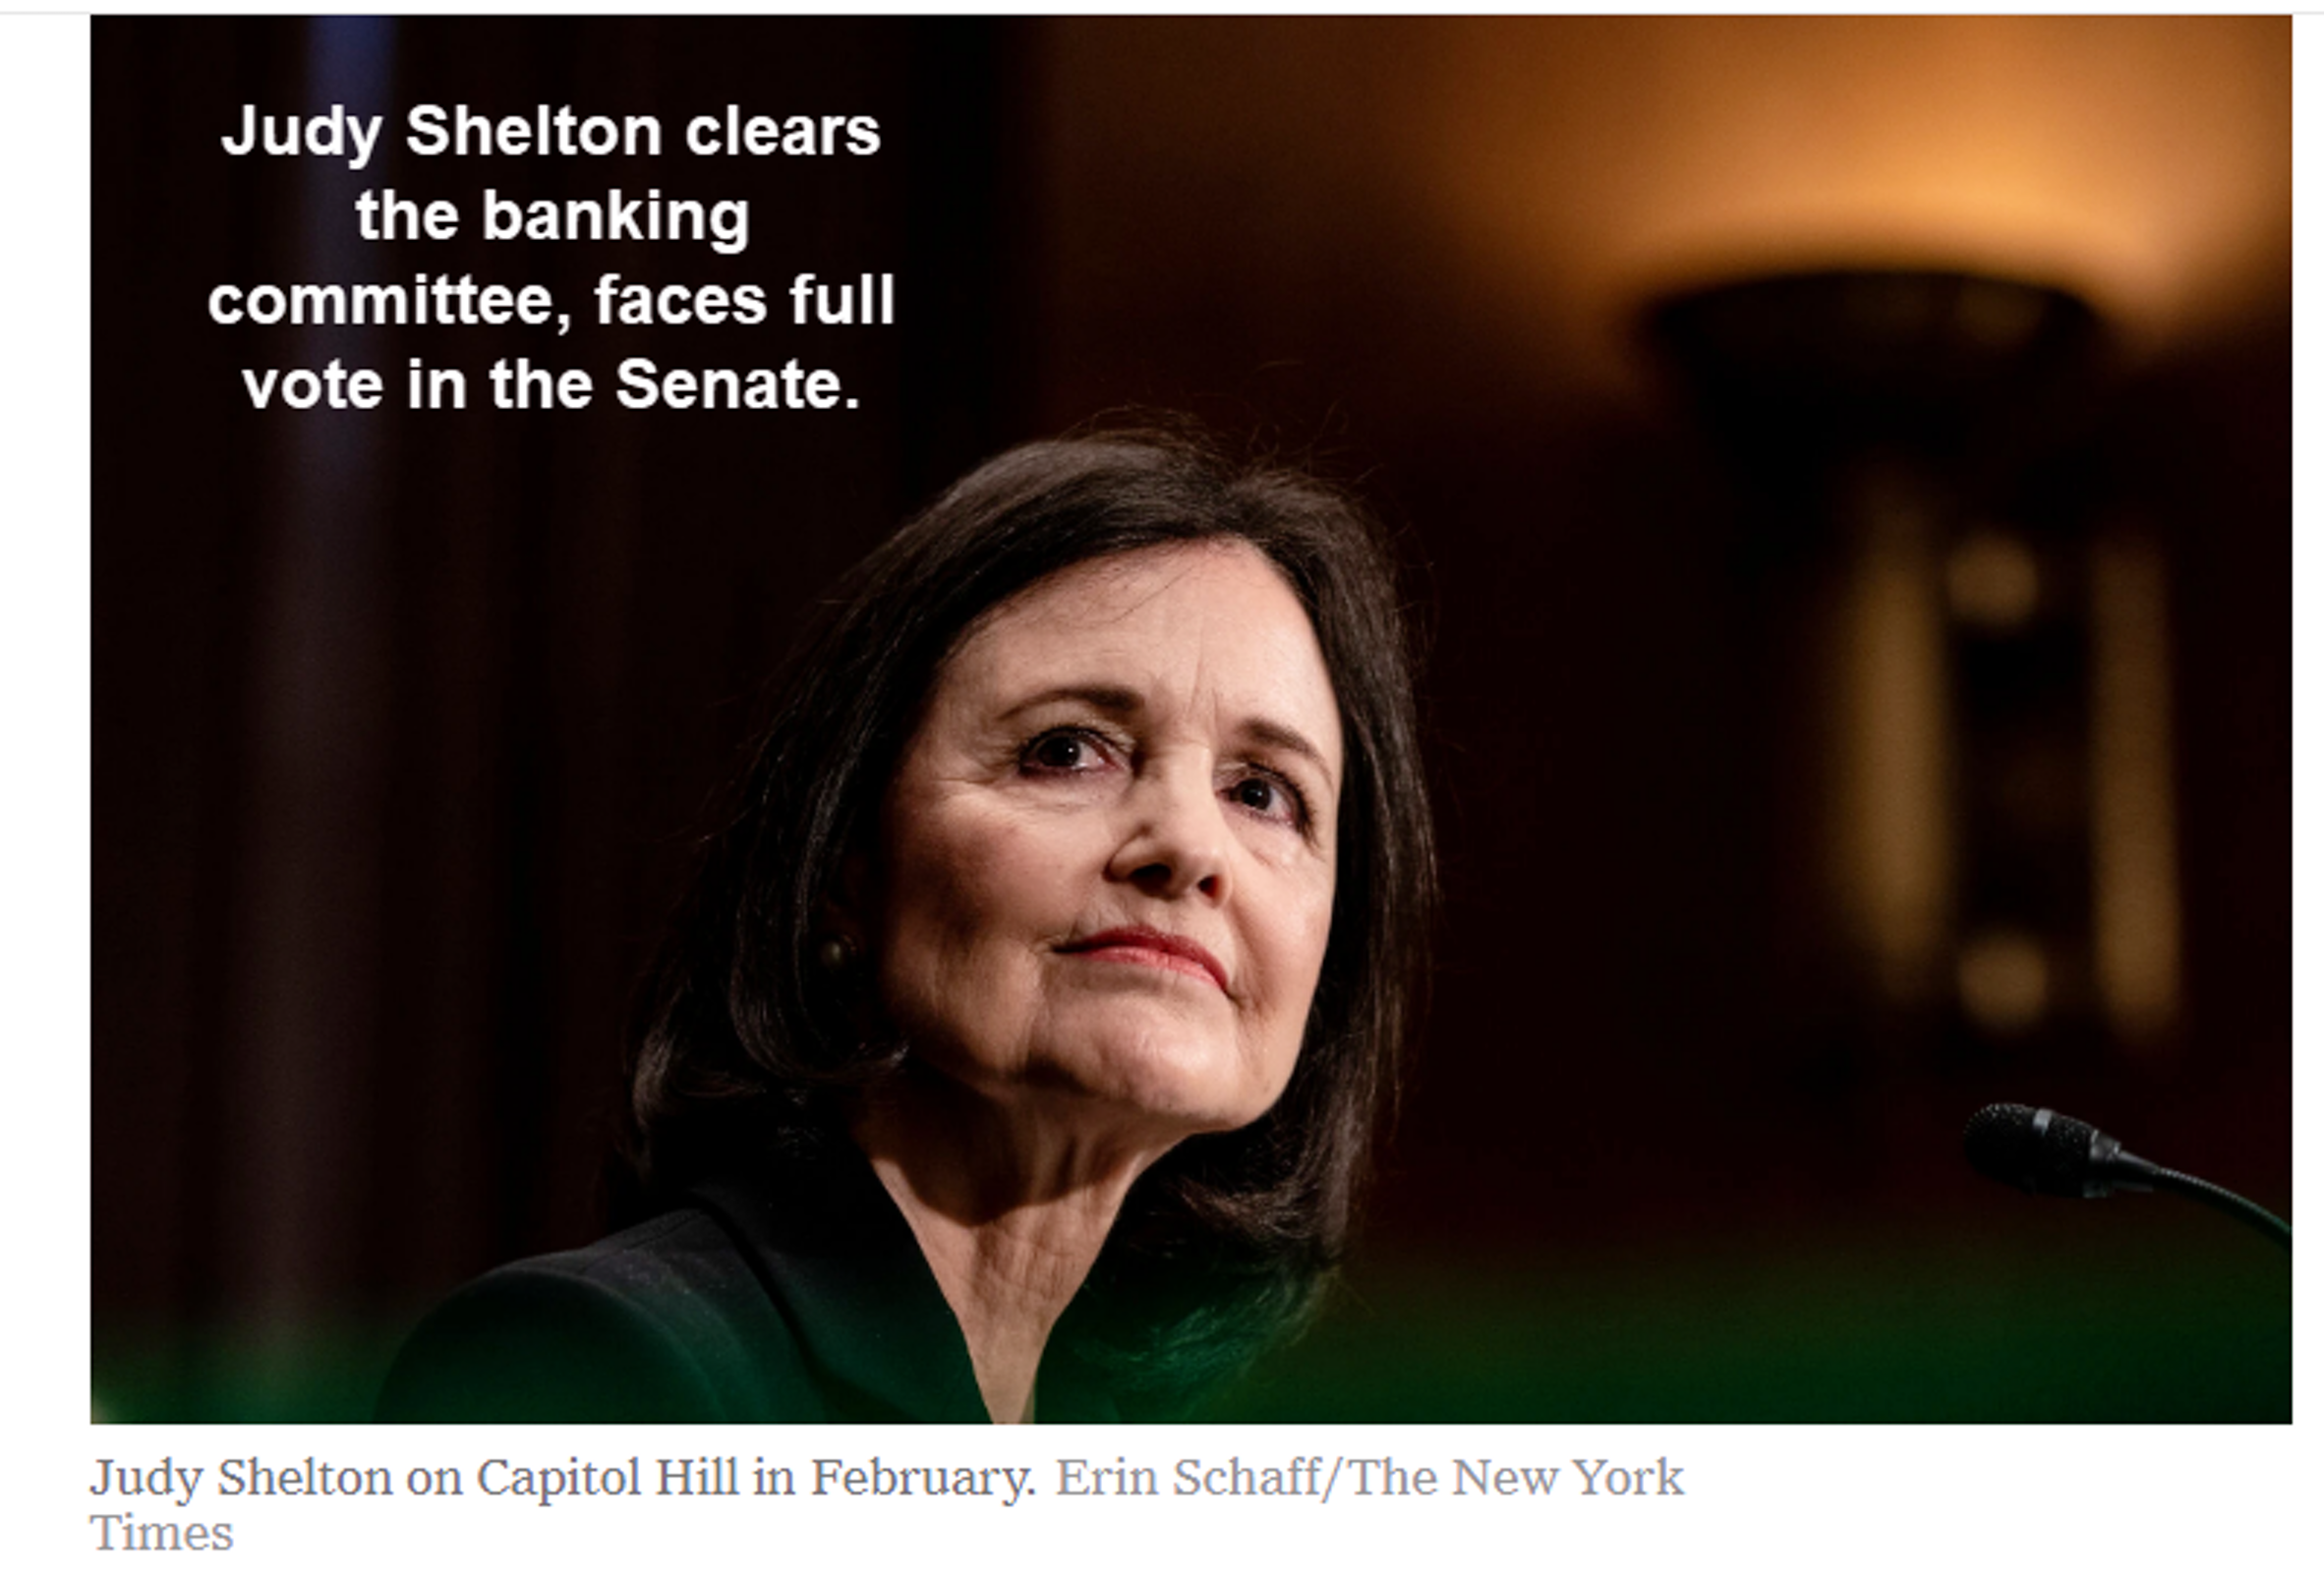 Controversial Gold Advocate Judy Shelton Will Soon Be On the Fed